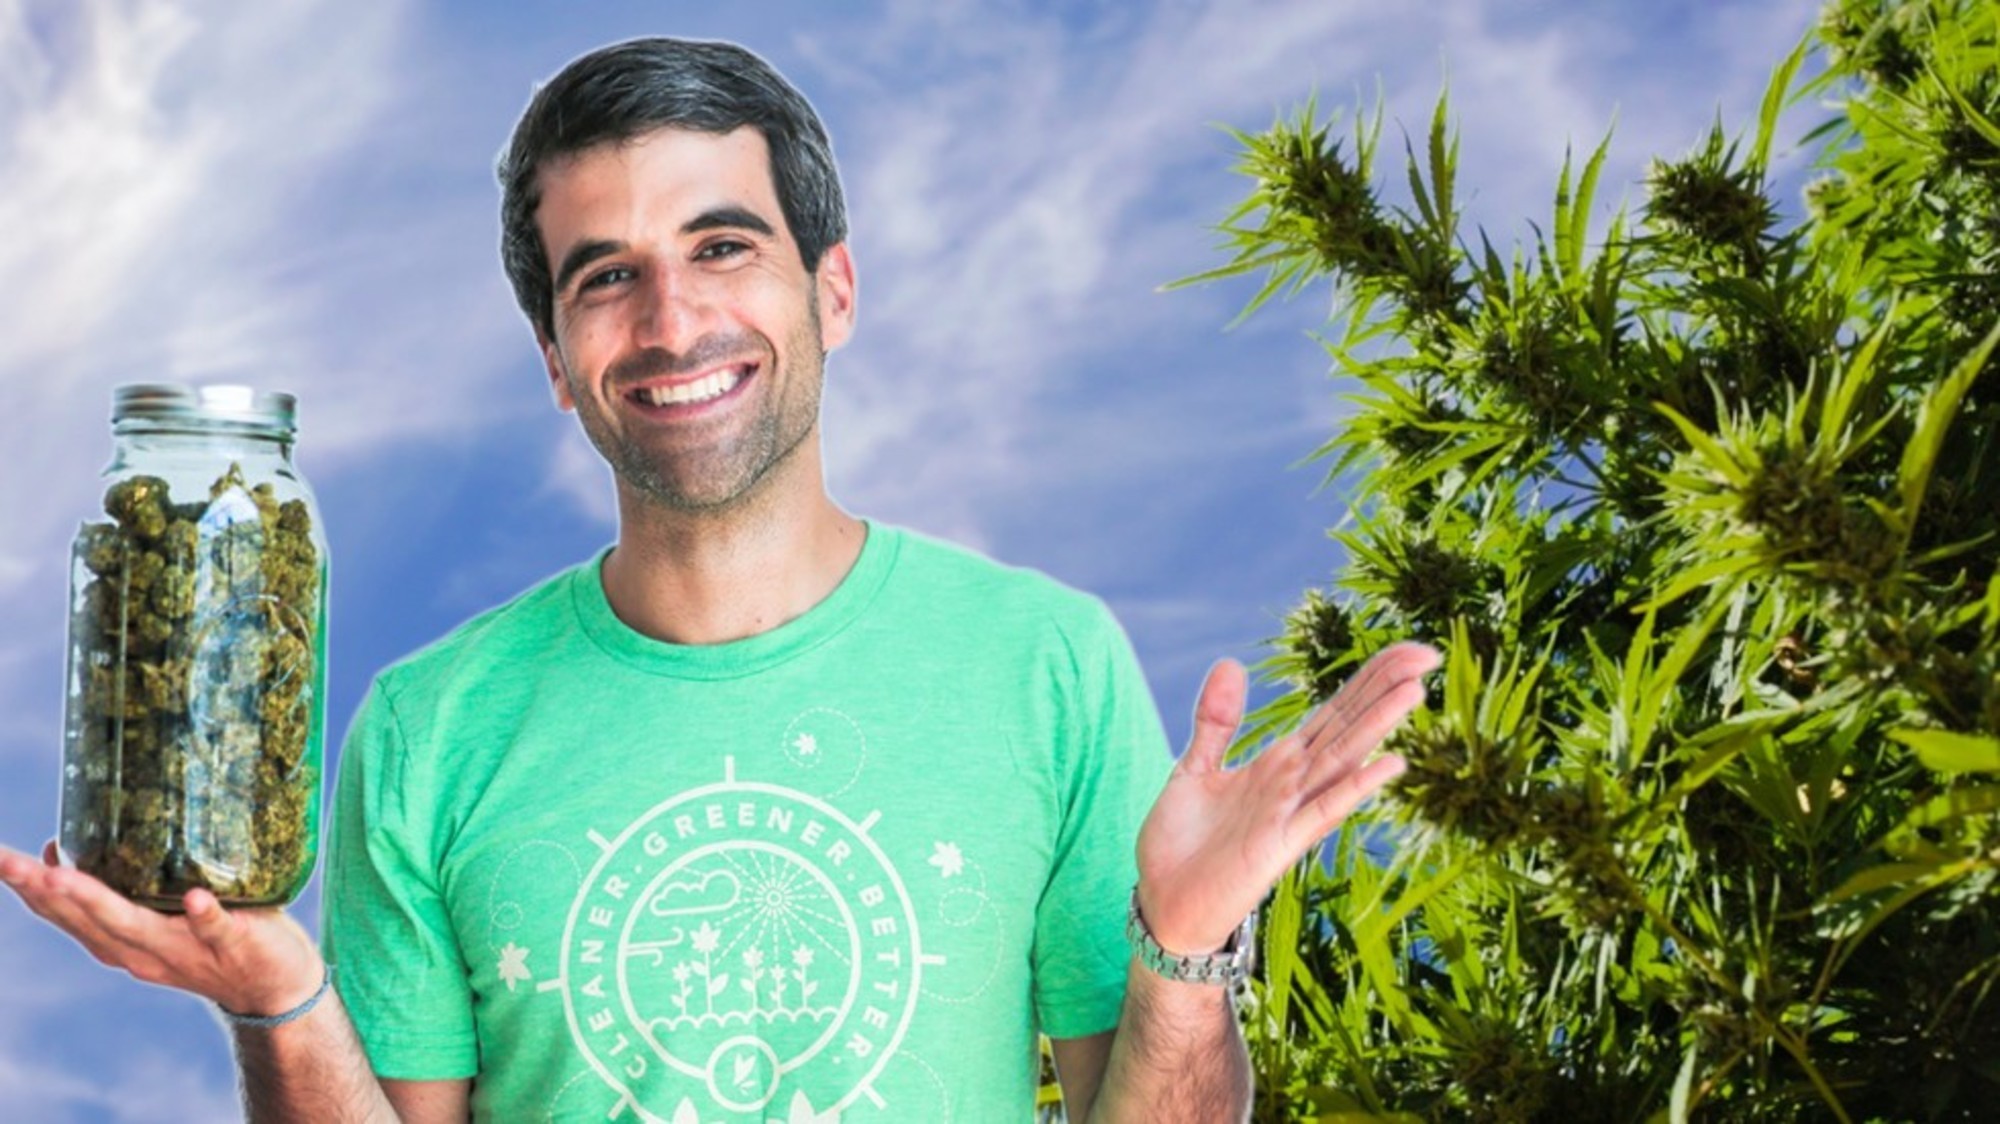 Meet The Former NASA Engineer Who Wants To Create The 'Whole Foods' of Weed